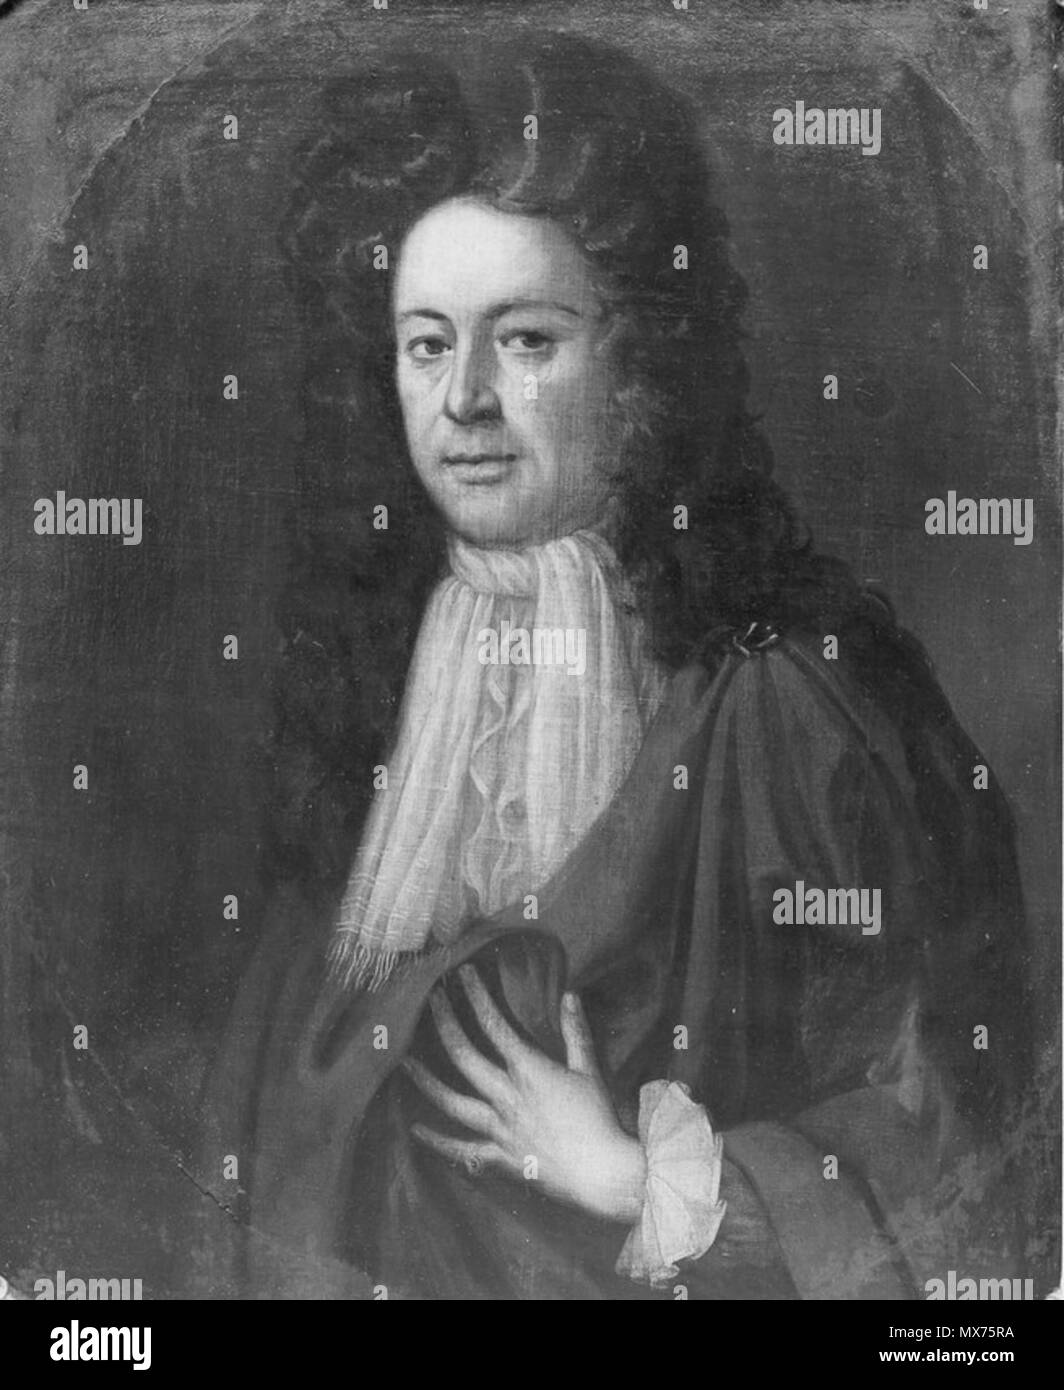 . English: Captain Seth Jermy (1653 - 1724) A framed oil painting, size 63 x 76 cm. Marks on the painting indicate that it was at one time in an oval frame. Seth is shown with fair hair, hazel eyes, a white cravat and a rust coloured cloak. A signet ring is on the little finger of the left hand. The painting was owned by Rev. Frank S Bennett (1866 - 1947), the Dean of Chester, who was a descendant of Mary Jermy, the daughter of Captain Seth Jermy. 1 January 2013, 19:19:40. Colin Jermy 112 Captain Seth Jermy Stock Photo